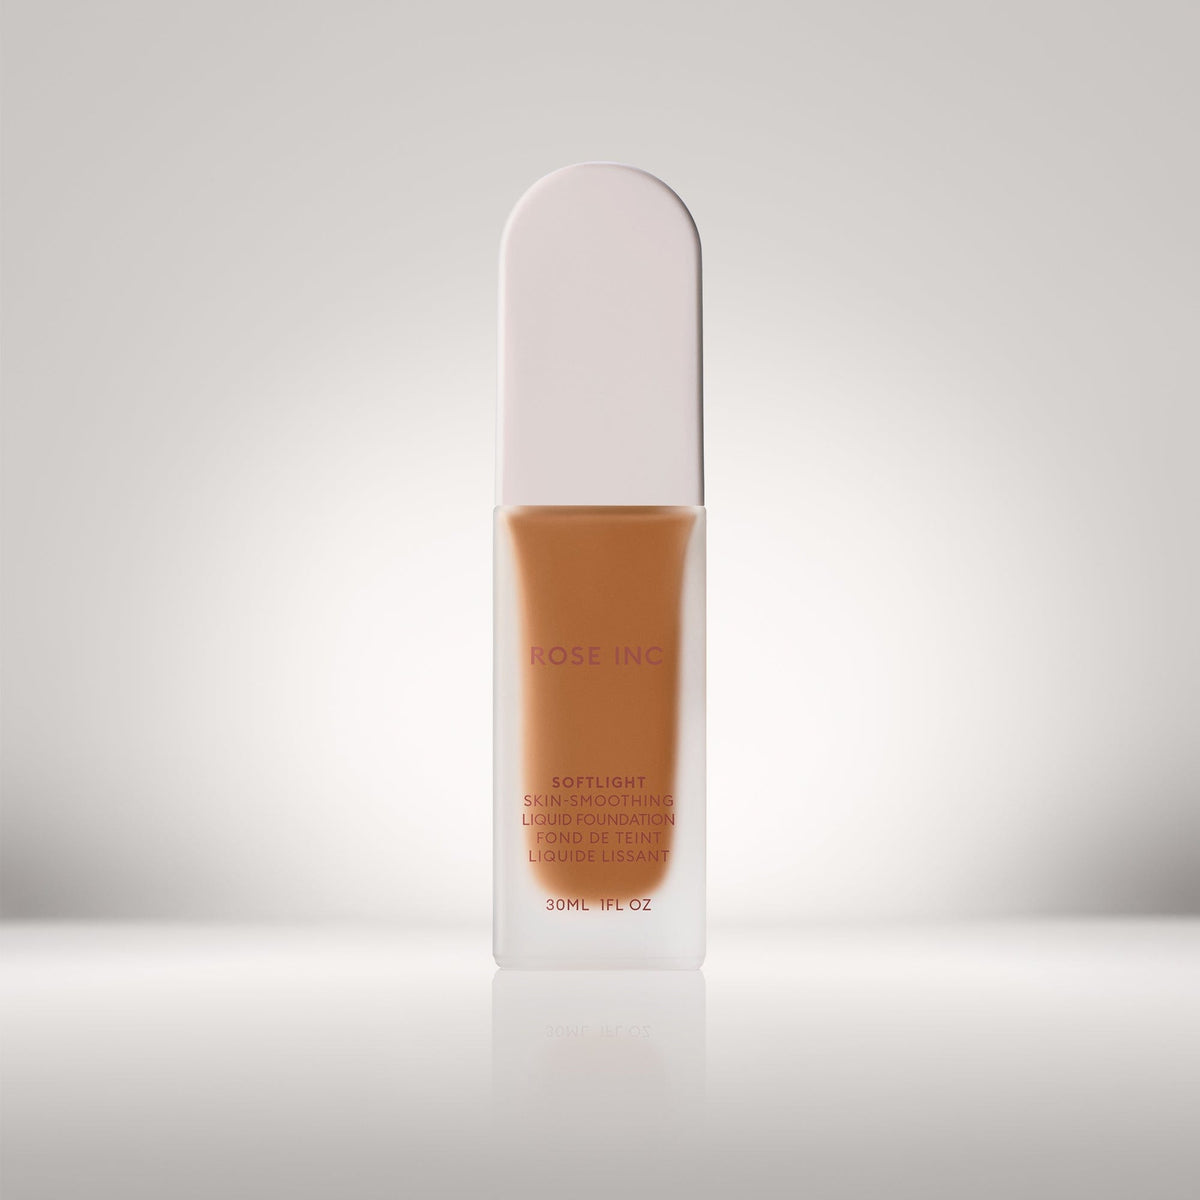 Soldier image of shade 25W in Softlight Smoothing Foundation